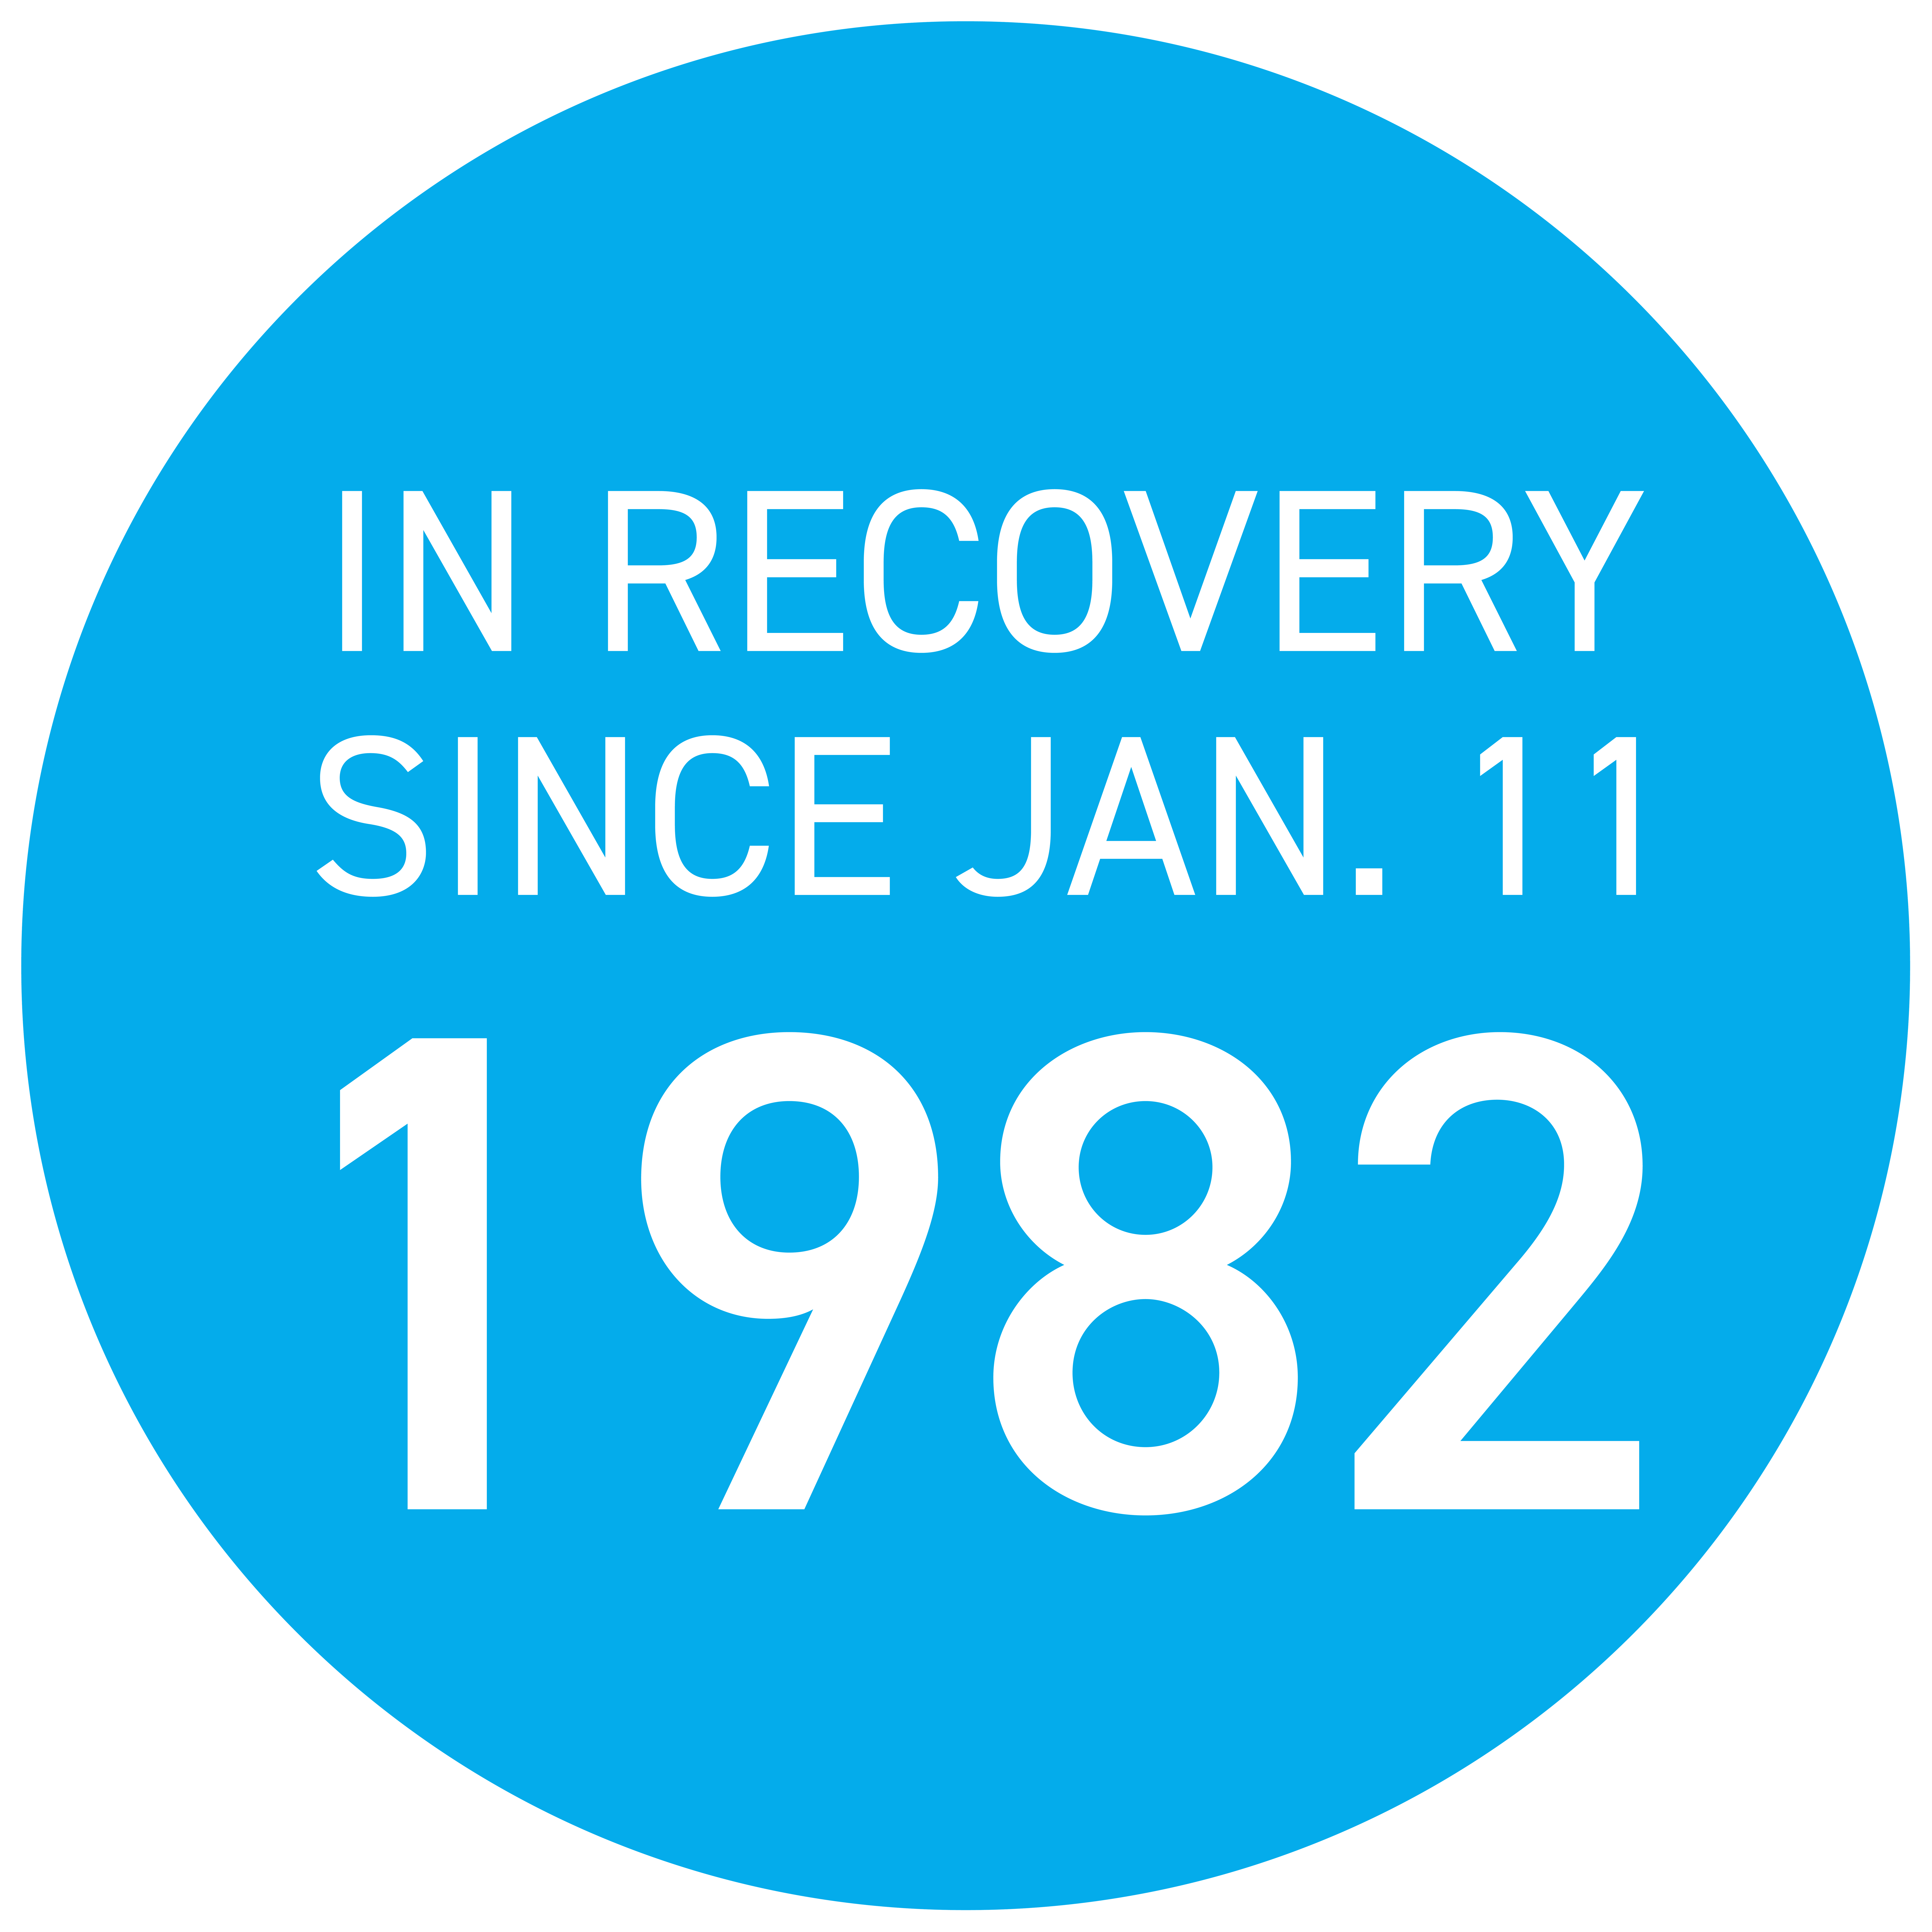 In recovery since January 11, 1982.